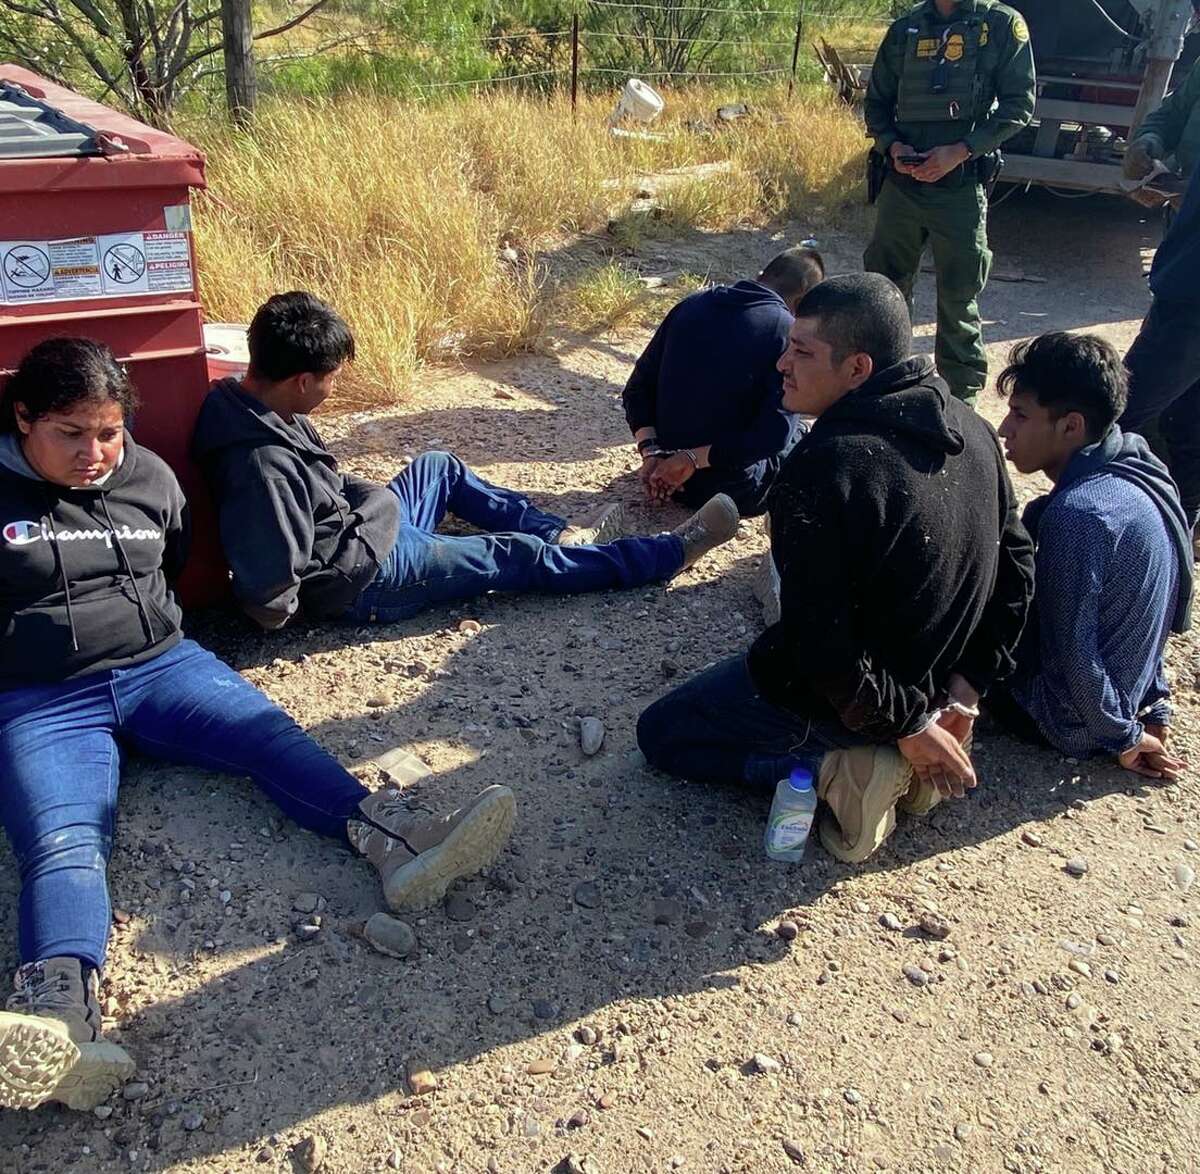 The Zapata County Sheriff's Office said they apprehended this group of migrants following a vehicle pursuit on July 19.